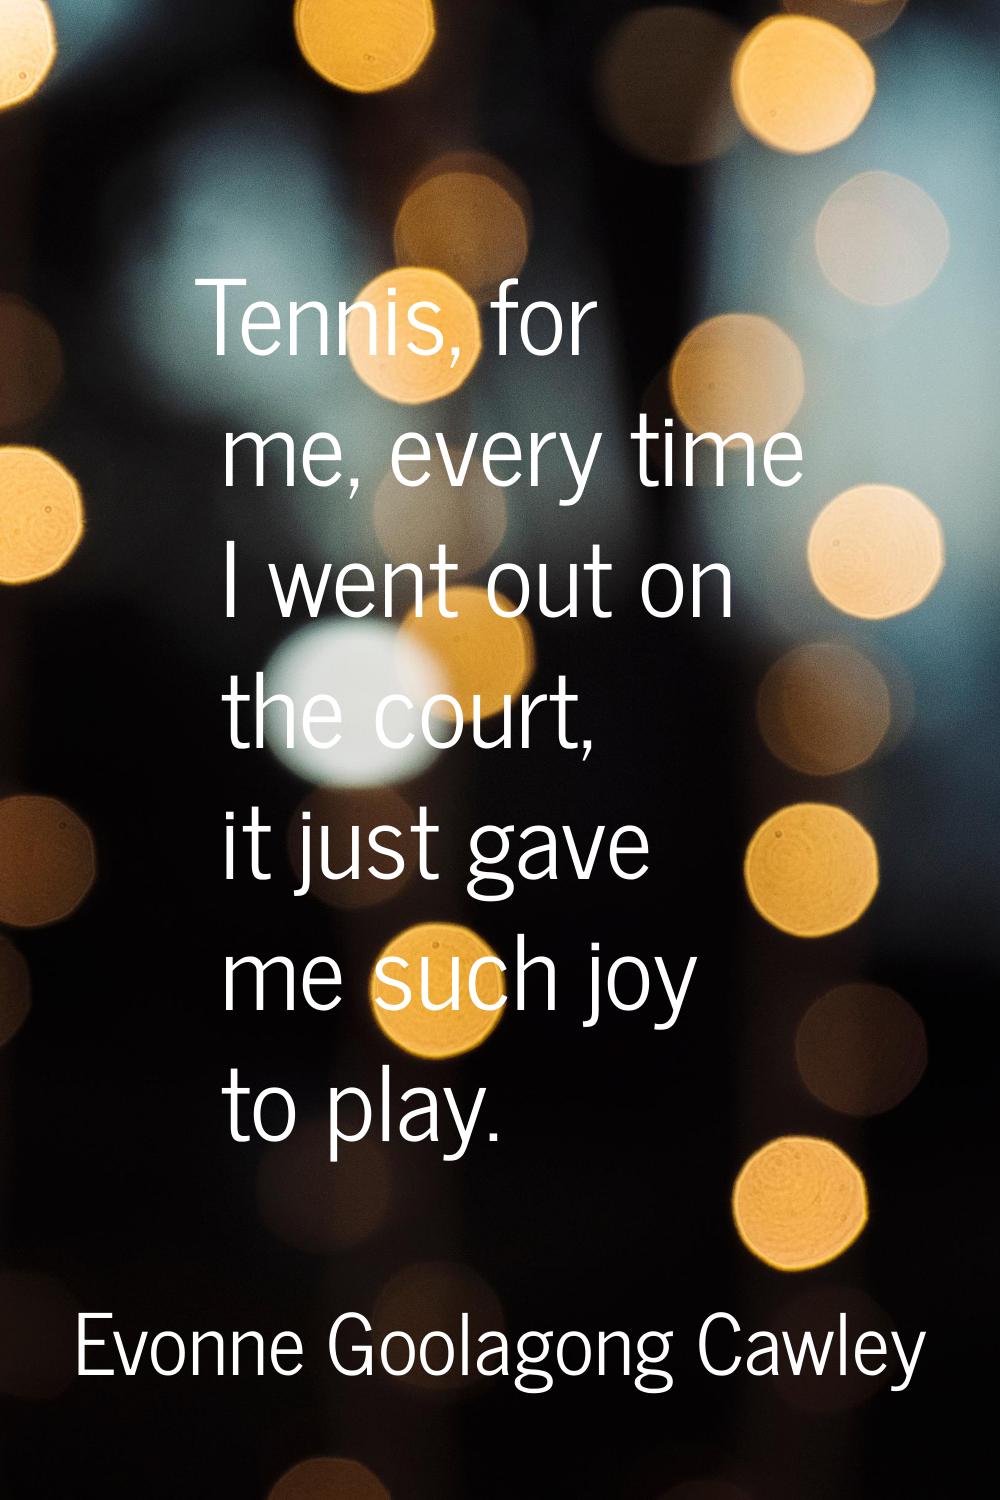 Tennis, for me, every time I went out on the court, it just gave me such joy to play.